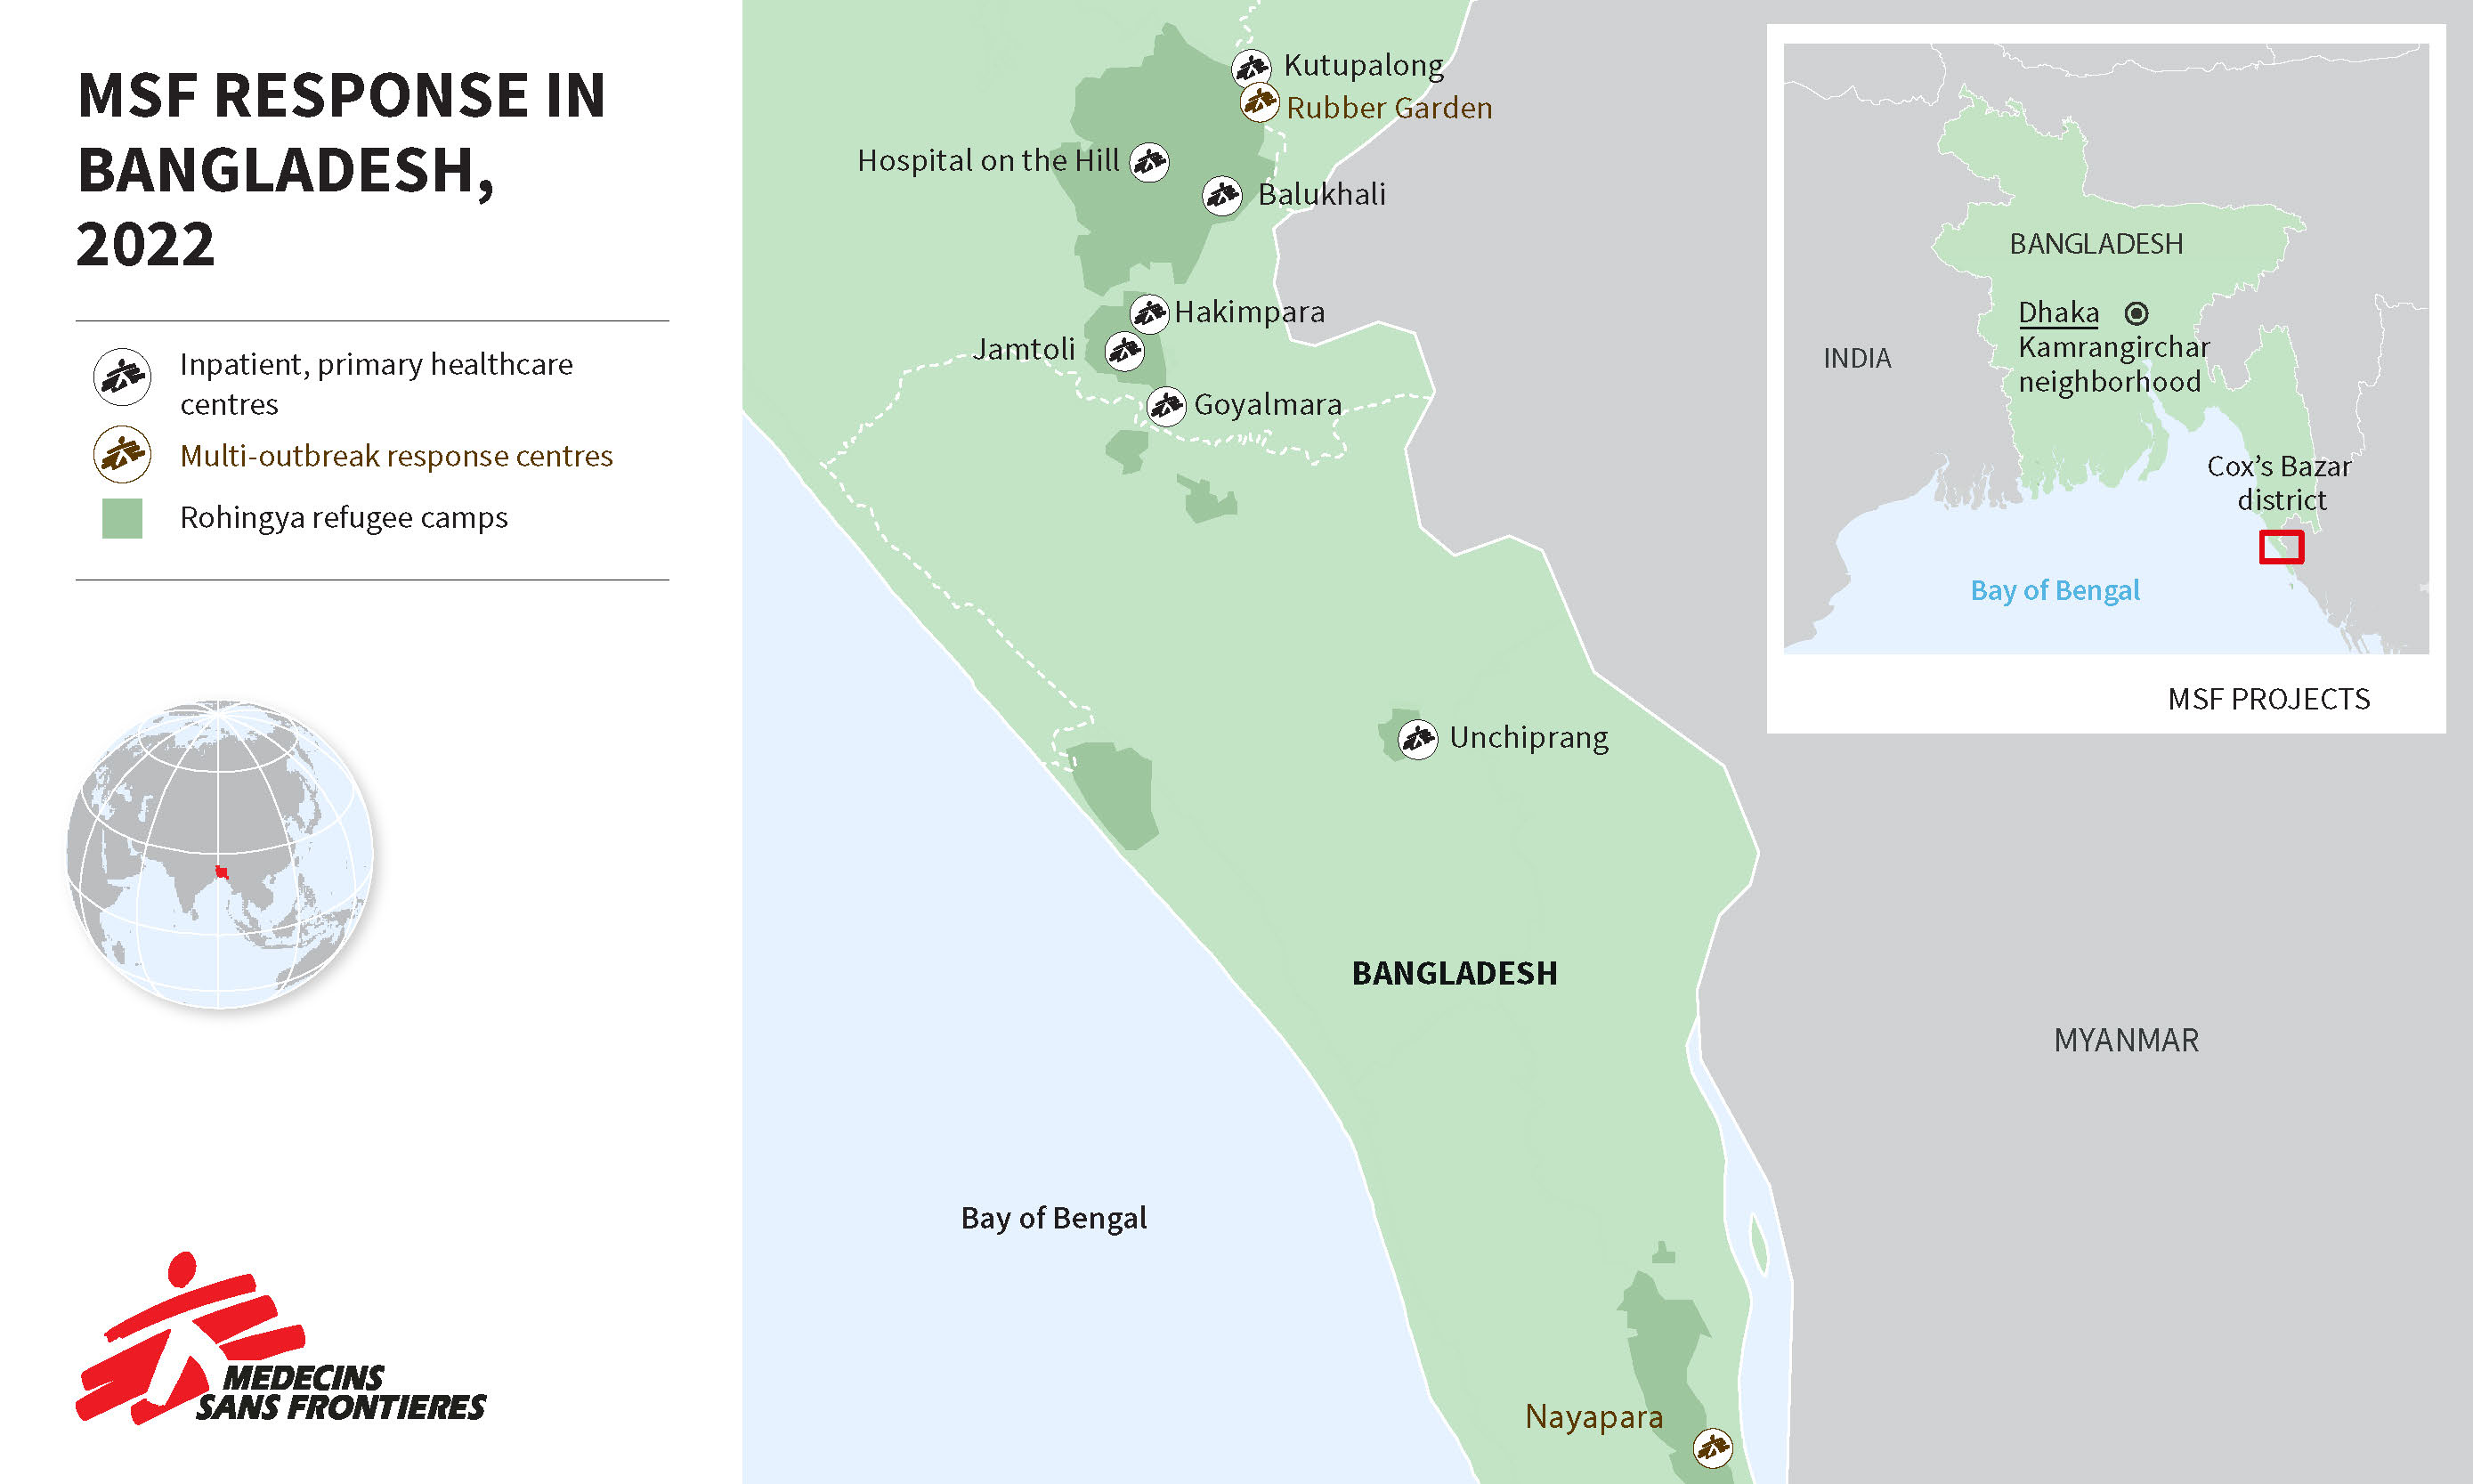 Map of MSF response in the Cox's Bazar region of Bangladesh